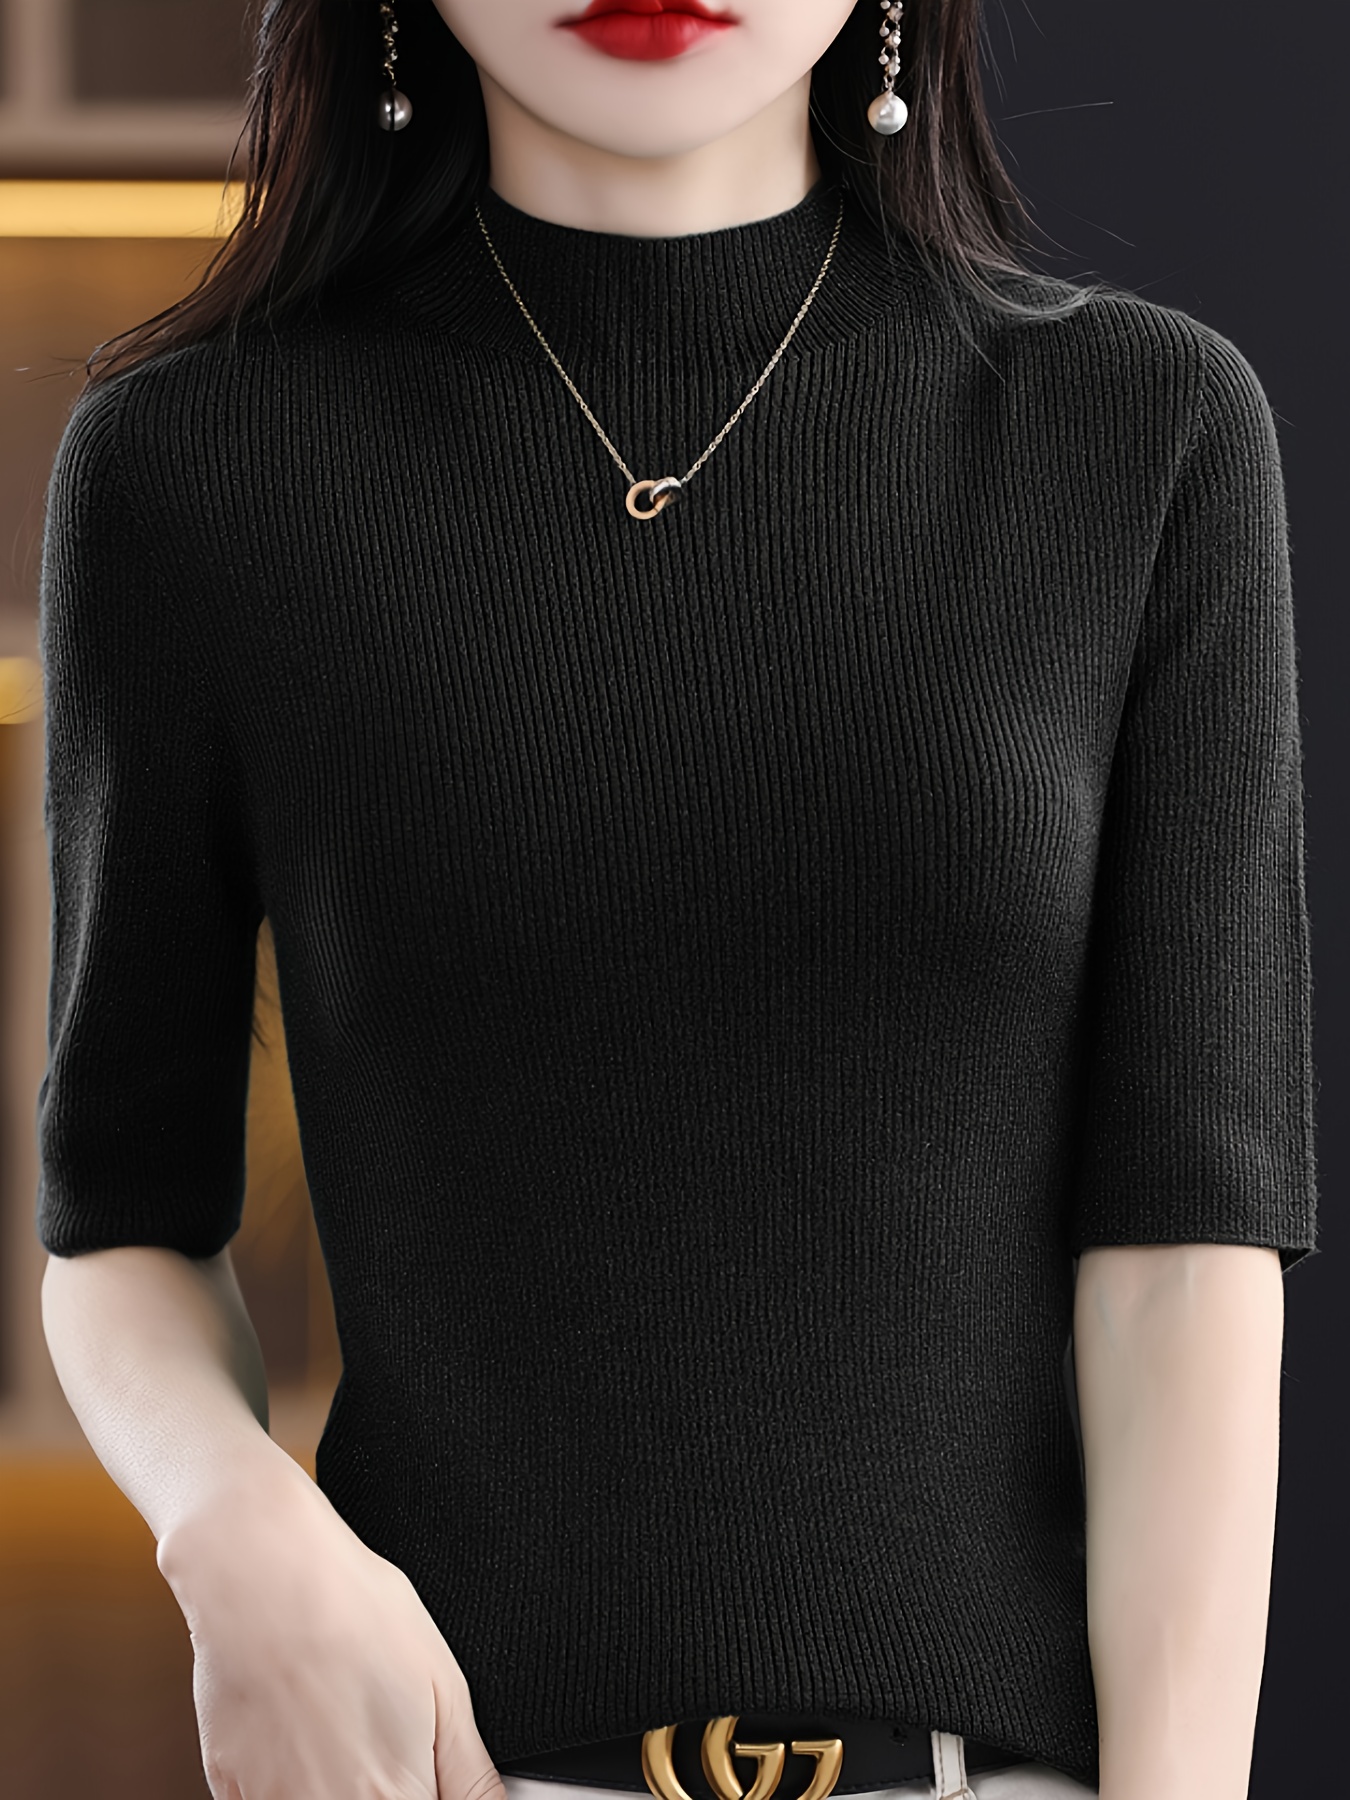 Solid Mock Neck Knitted Top, Casual Short Sleeve Slim Sweater, Women's Clothing